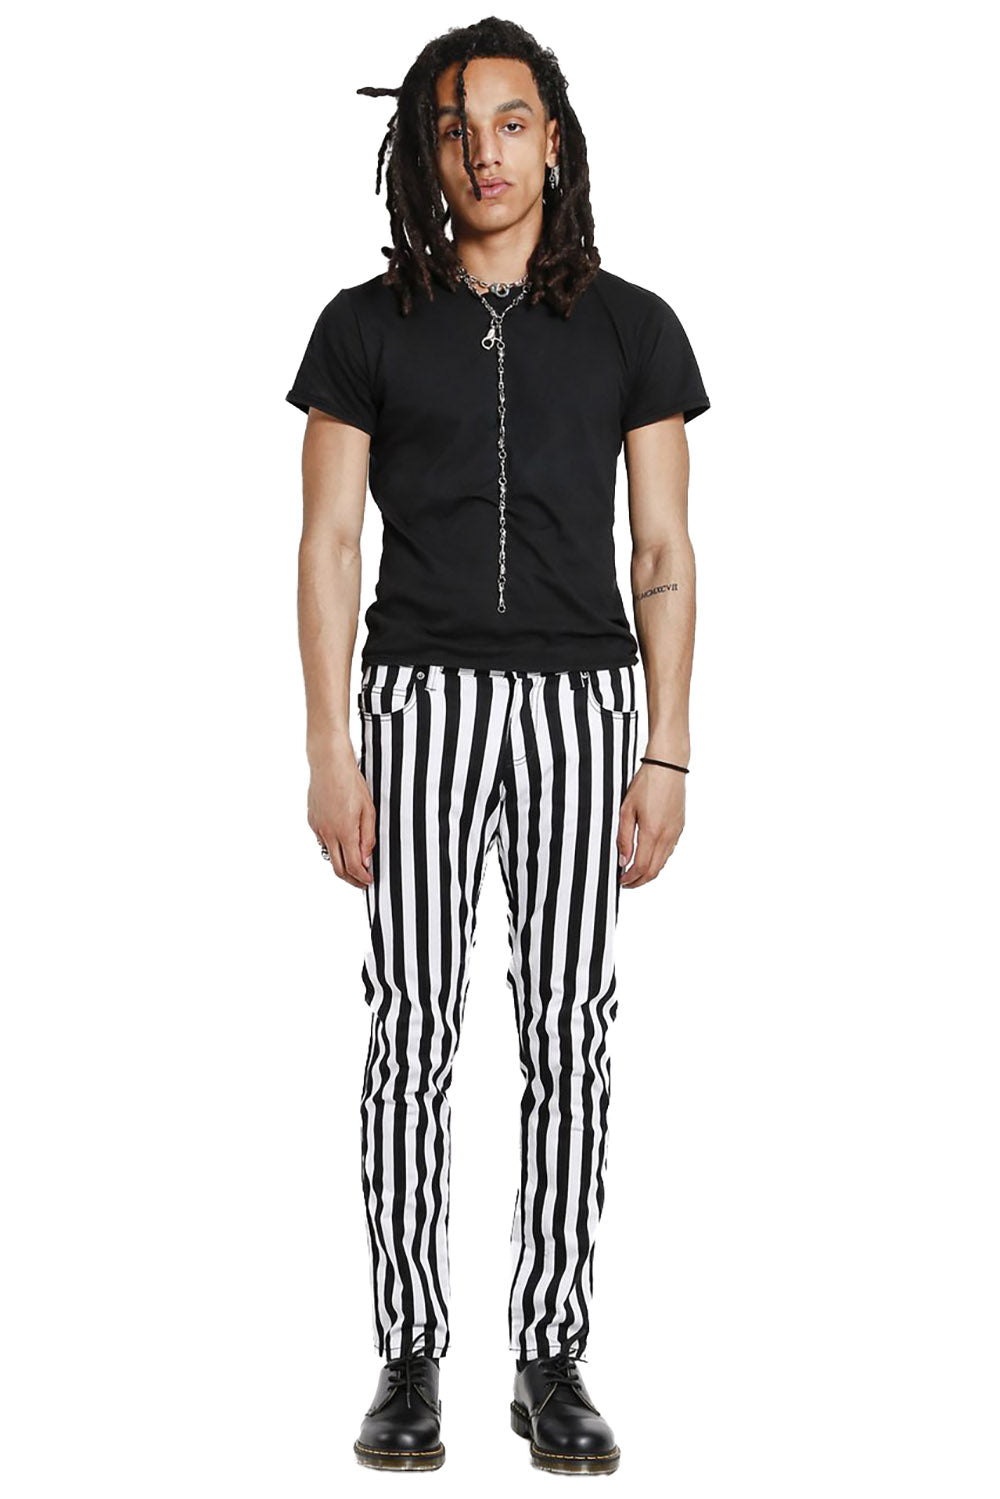 What to wear with black and white striped pants? Outfits and tips | Fashion  Rules | Stripe pants outfit, Black and white striped pants, Stripes fashion